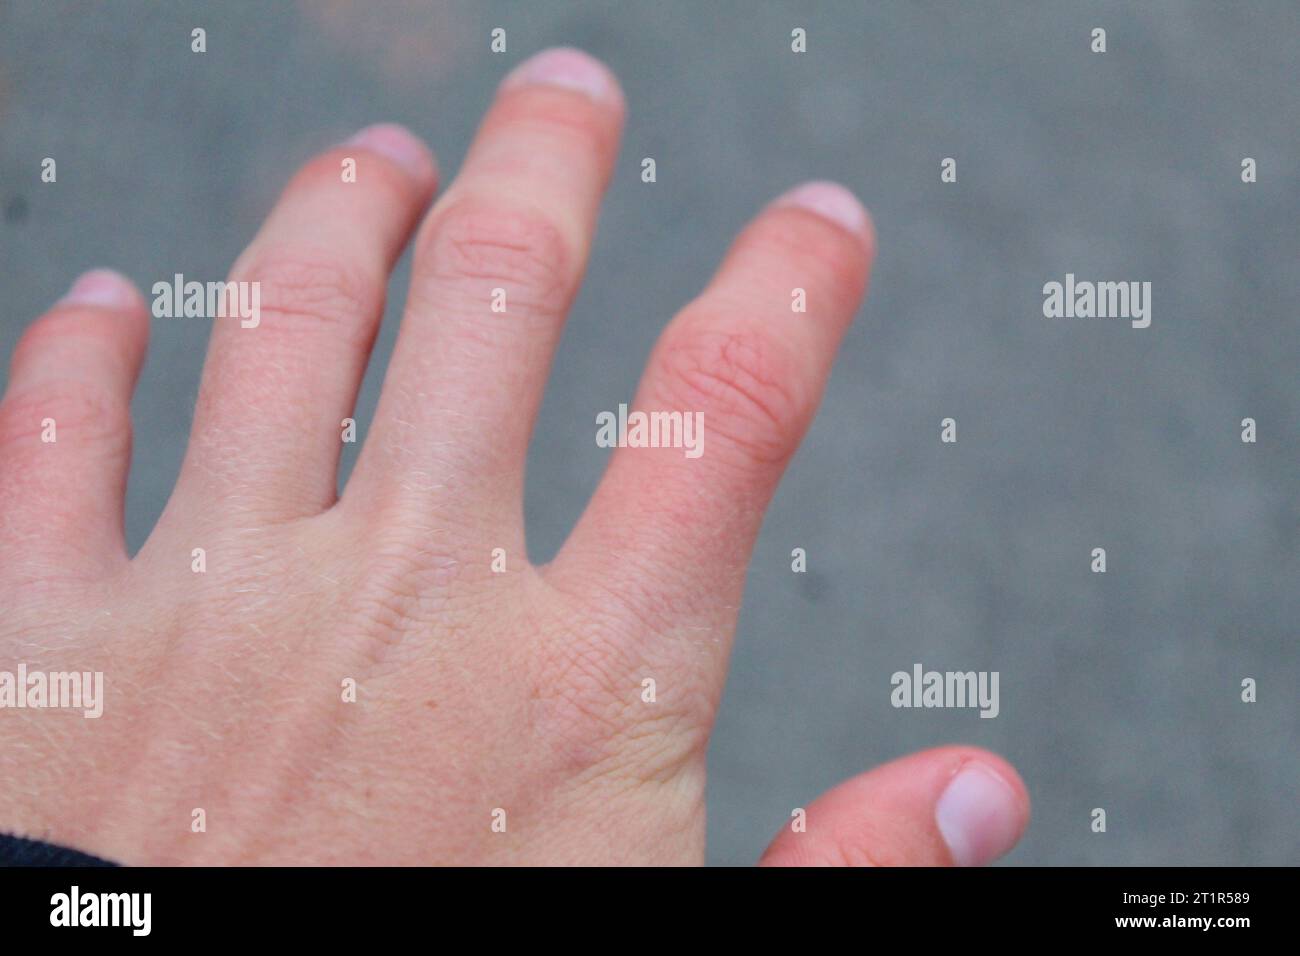 A photo of a white, cold, pale hand reaching out. Stock Photo